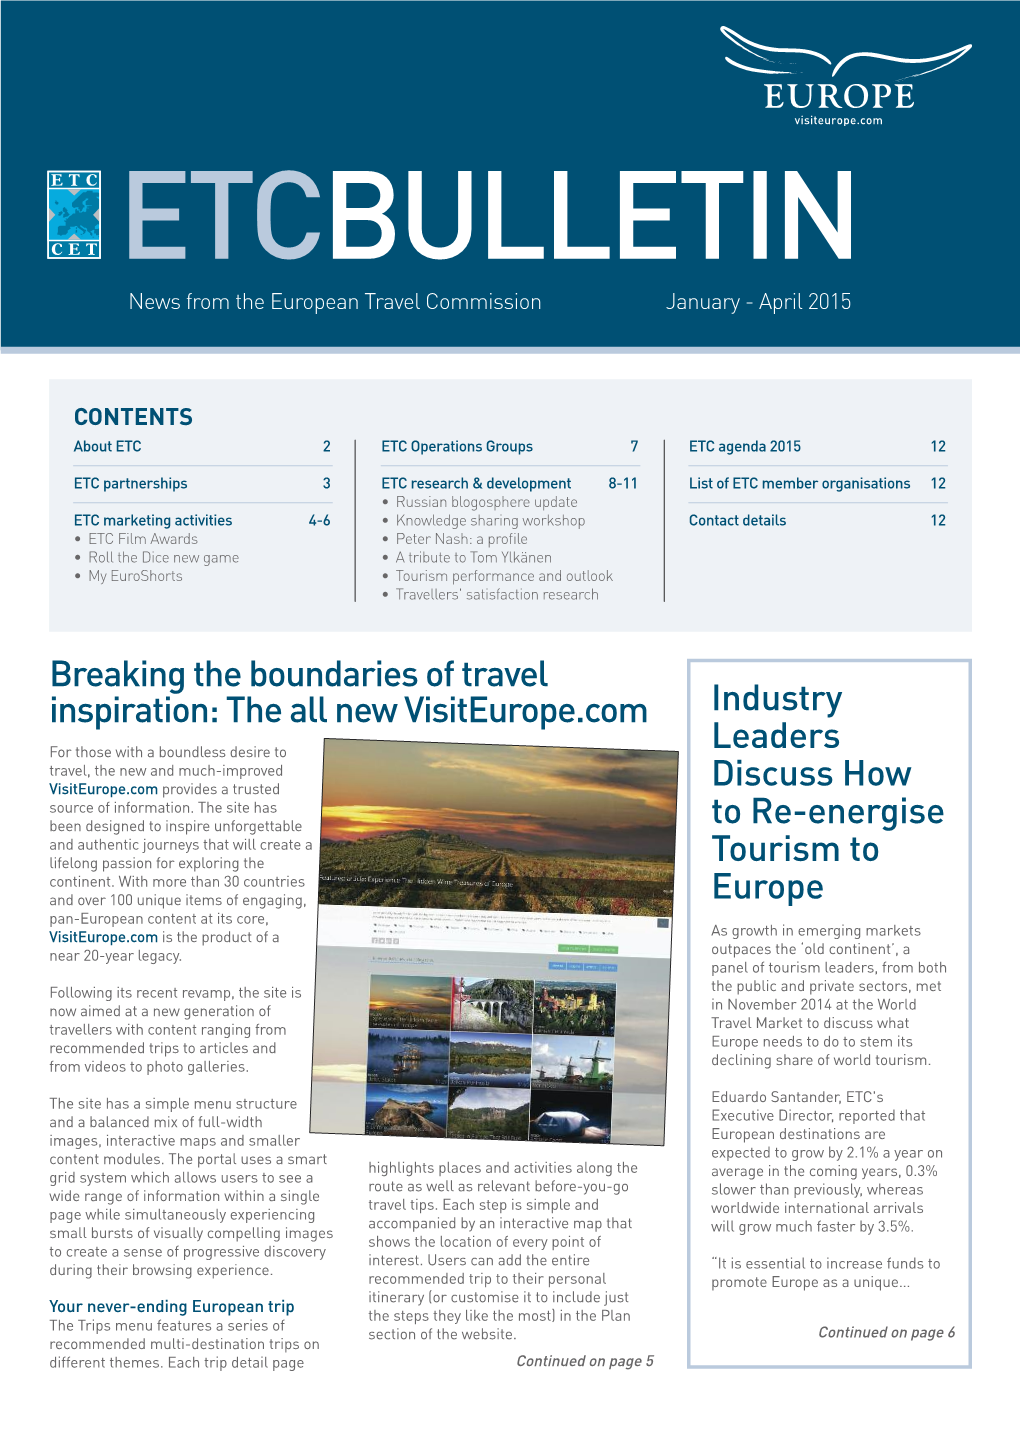 Industry Leaders Discuss How to Re-Energise Tourism to Europe